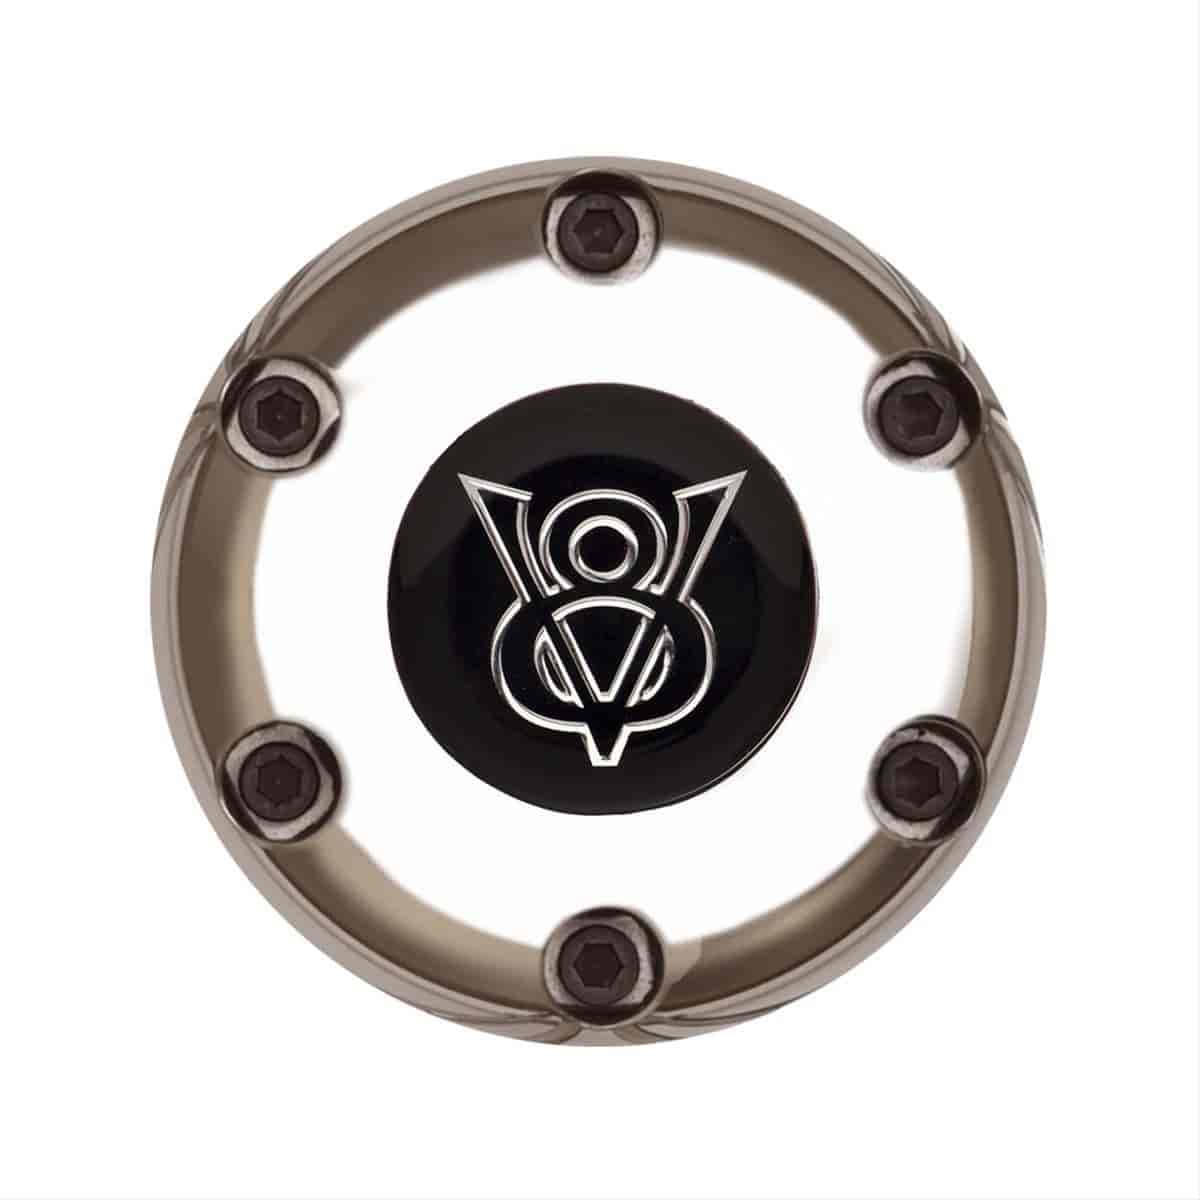 GT3 Gasser/Euro Style Horn Button "V8" Emblem Colored 6-Hole Style Style Polished with Black Center